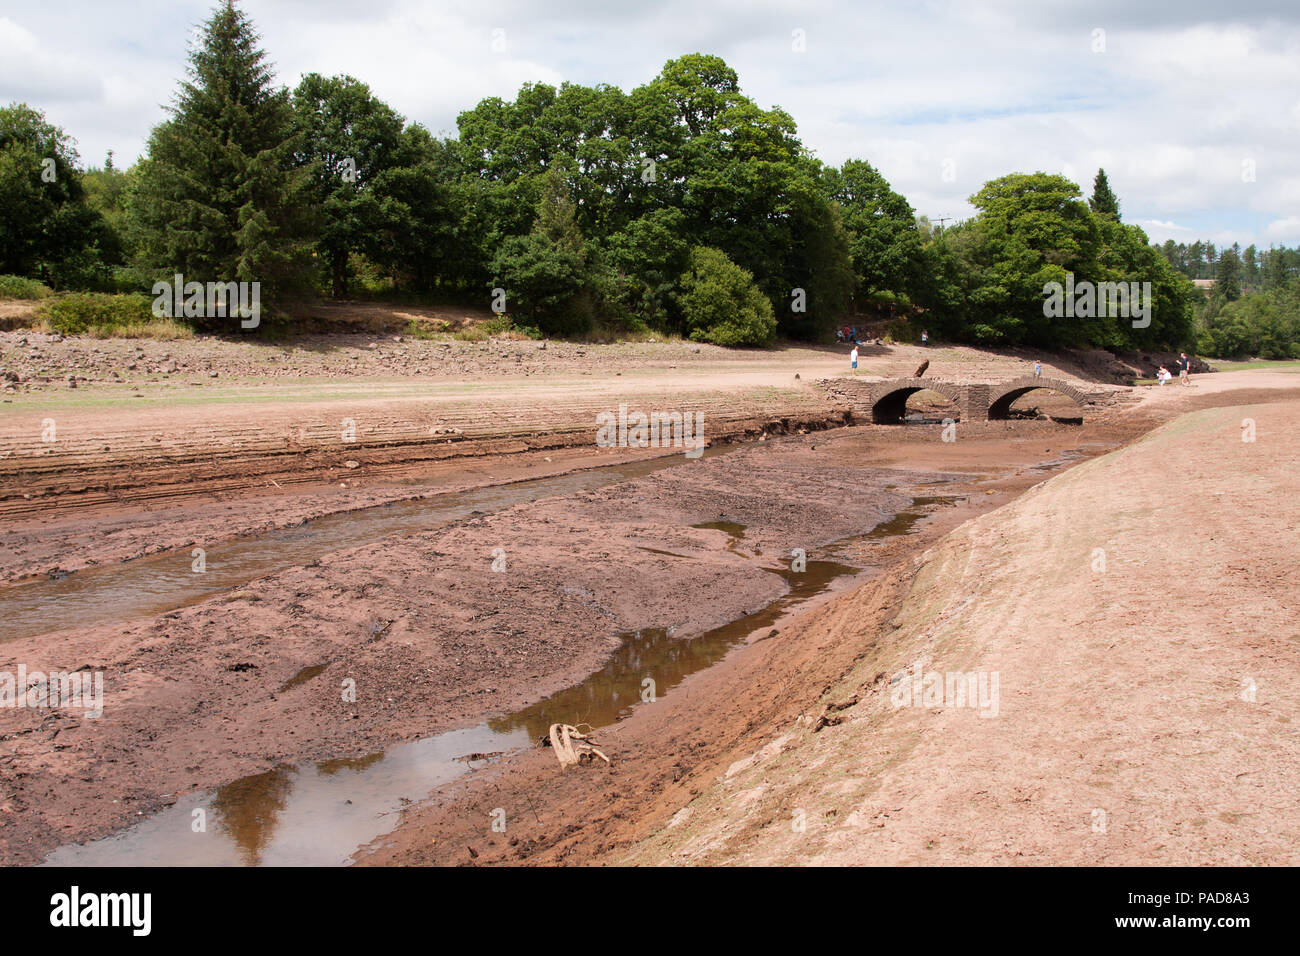 Llwyn Onn reservoir, Merthyr Tydfil, South Wales,  UK.  22 July 2018.  UK weather: The heatwave has caused this reservoir to become severely depleted, with the water line well below normal.  A stream that runs into the reservoir has dried up.  Pont Yr Daf bridge, an old bridge in use before the reservoir's construction, now usually underwater, has been uncovered.  Credit: Andrew Bartlett/Alamy Live News Stock Photo